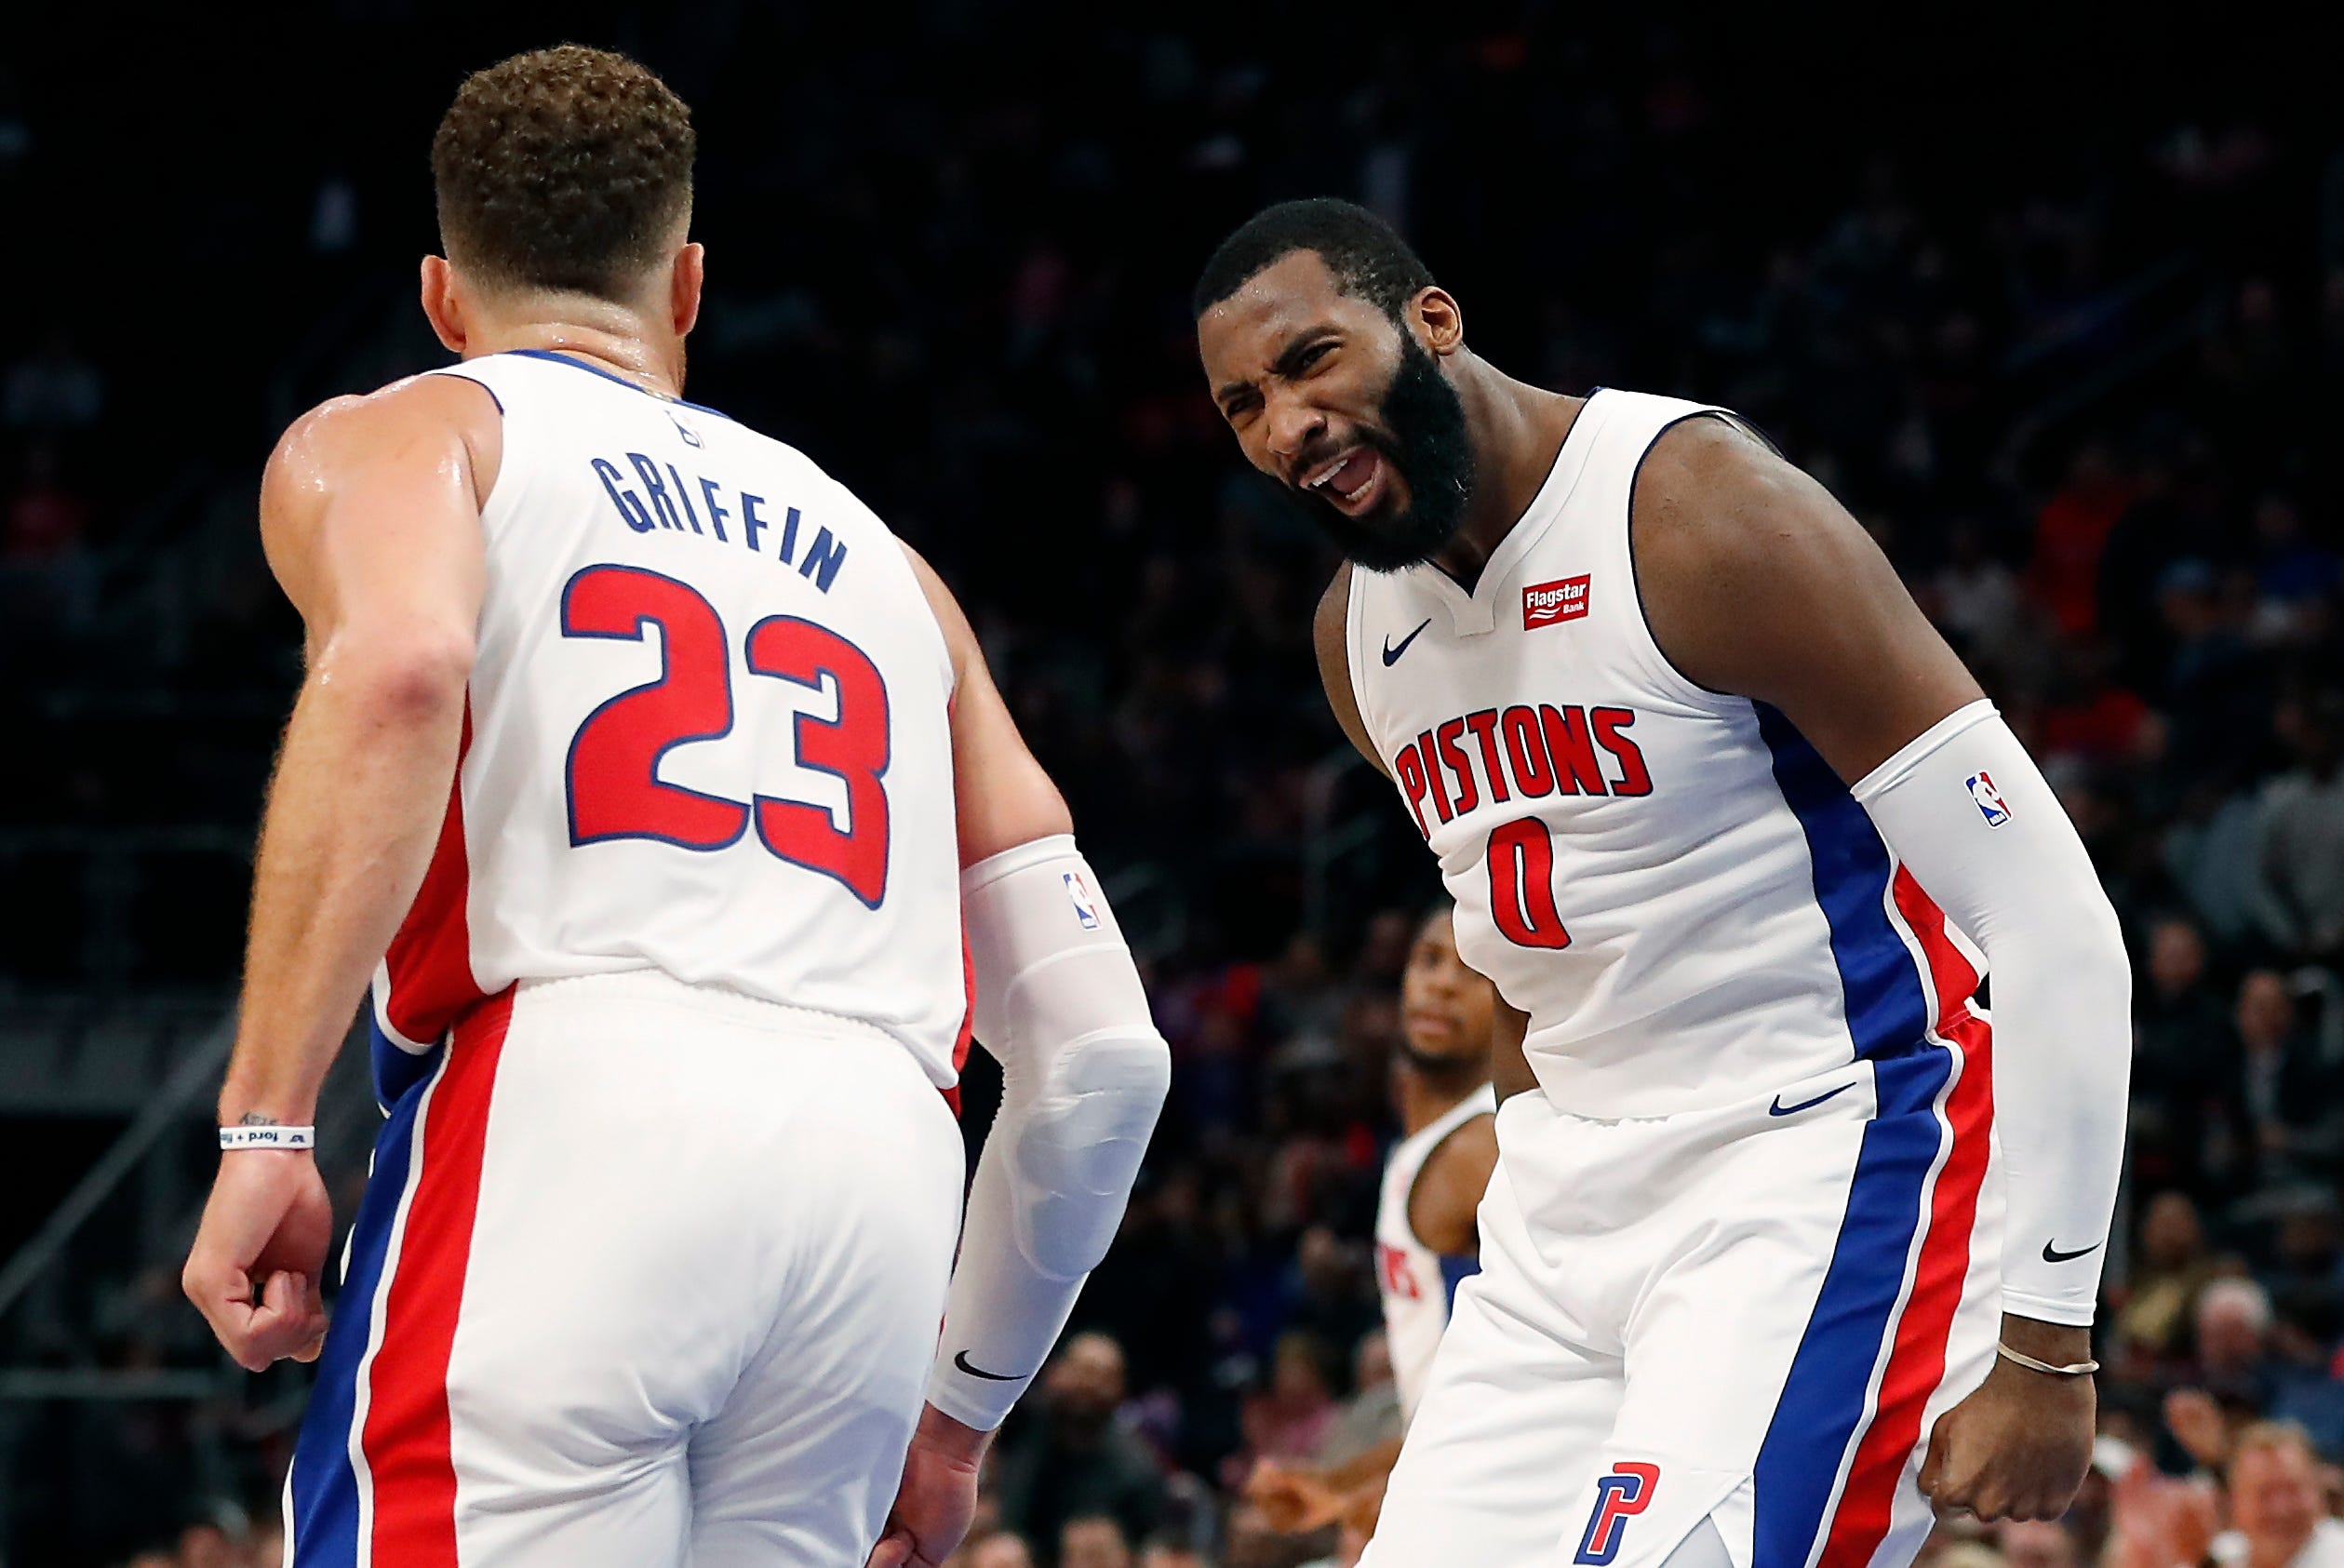 Go through the gallery for analysis by Rod Beard of The Detroit News as he ranks the Pistons in value for 2019-20.